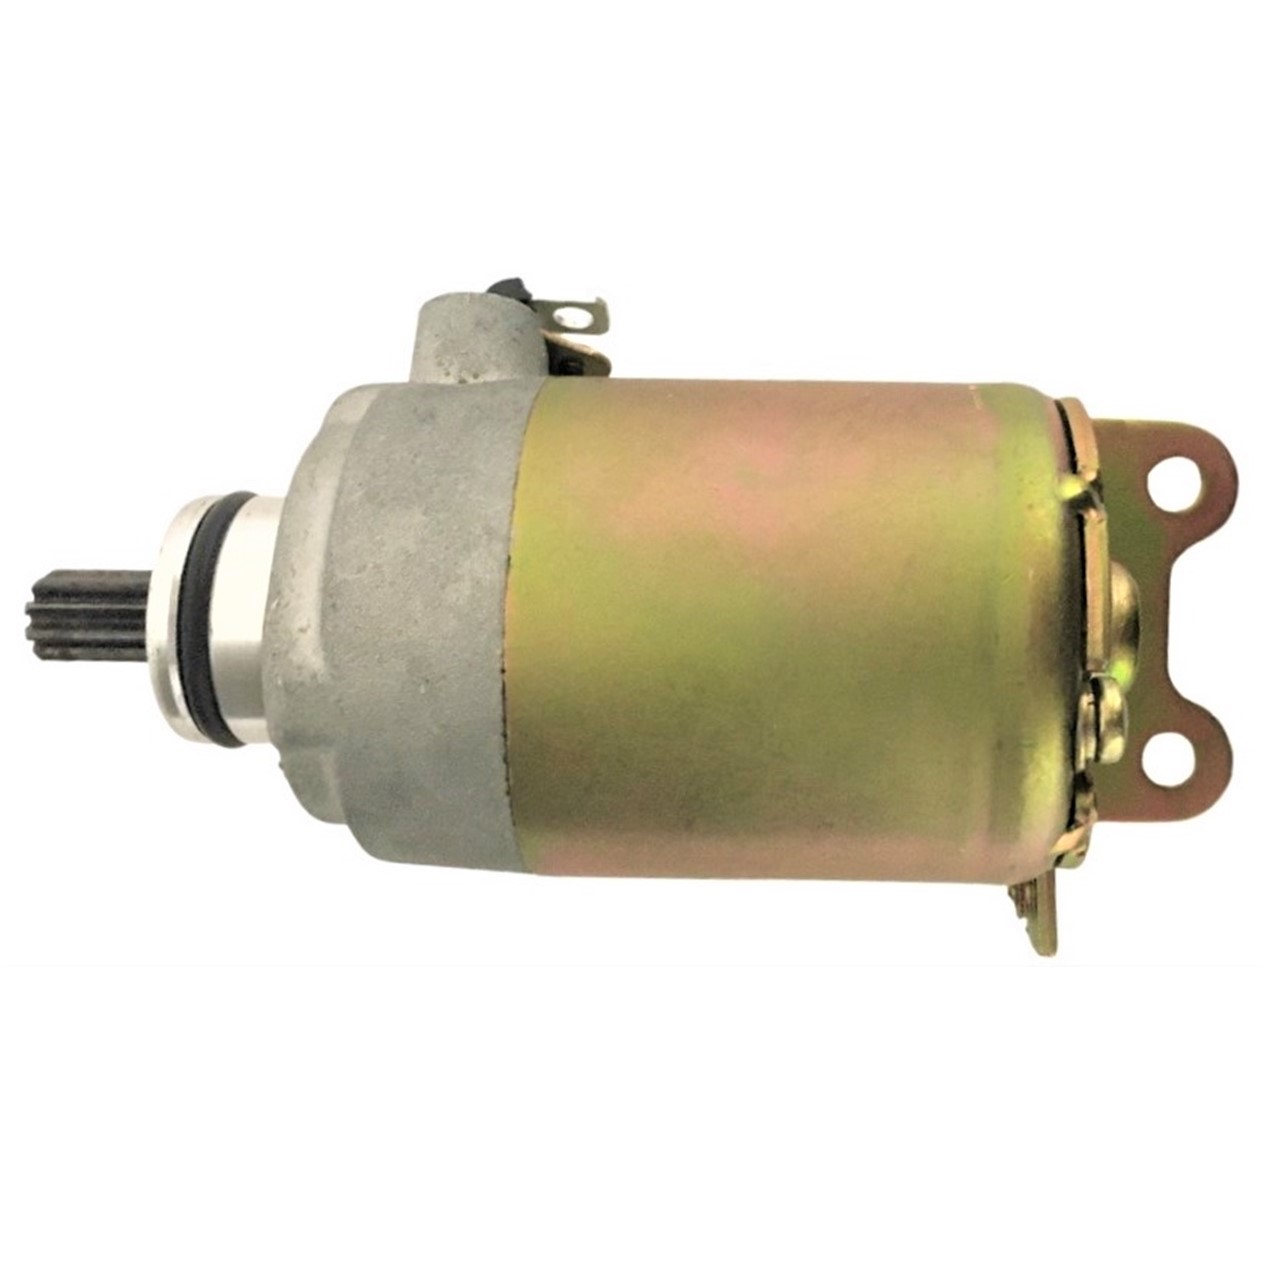 STARTER MOTOR Fits Some Chinese ATVs, Dirtbikes, and other products. Shaft Splines=9 Spline L=18mm Flange= 30mm, 1 ring terminal, Bolts c/c=38mm, center hole 18mm from body. Main body OG=60, L=90mm